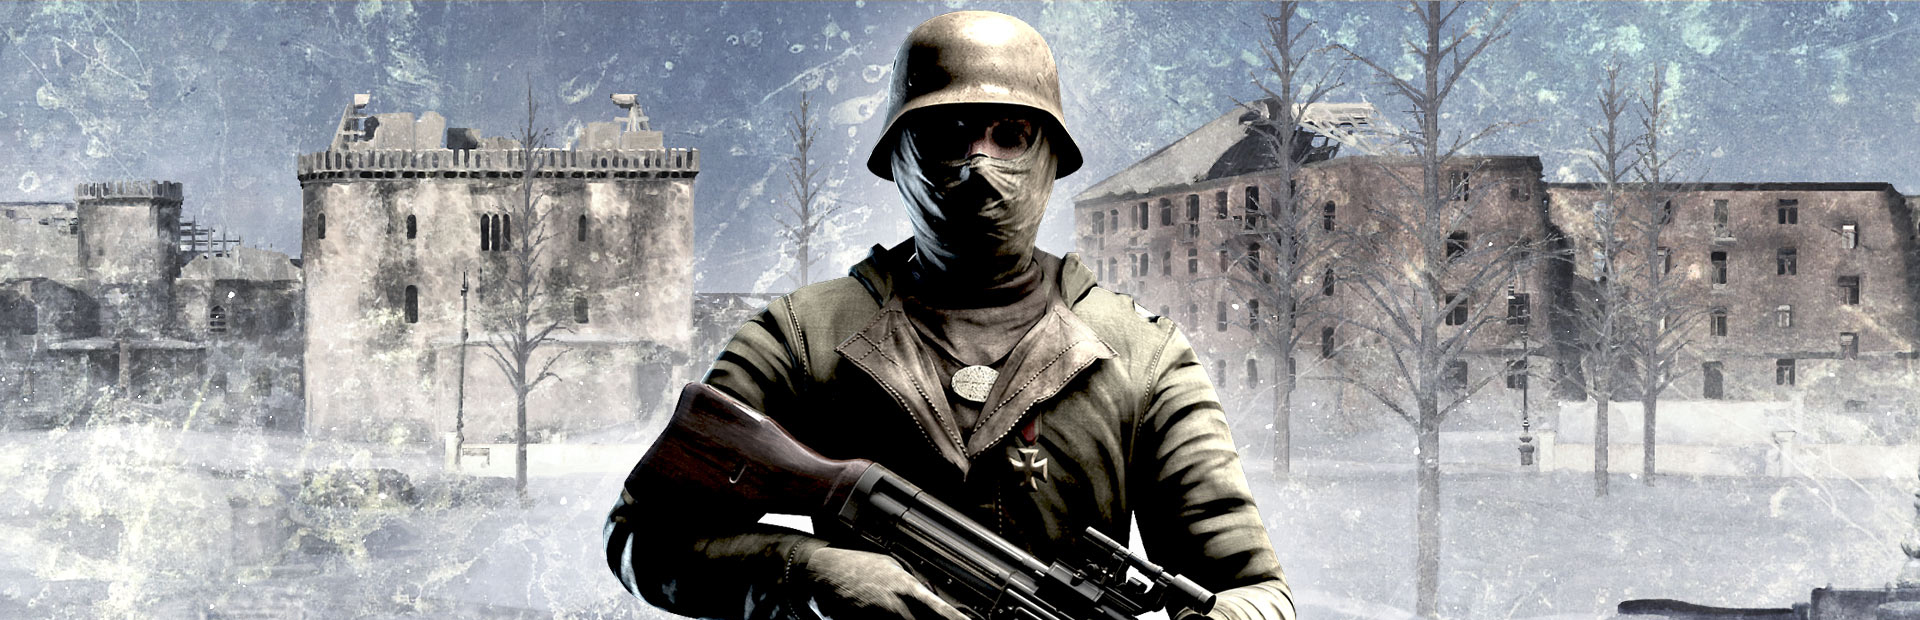 red orchestra 2 heroes of stalingrad singleplayer gone from steam